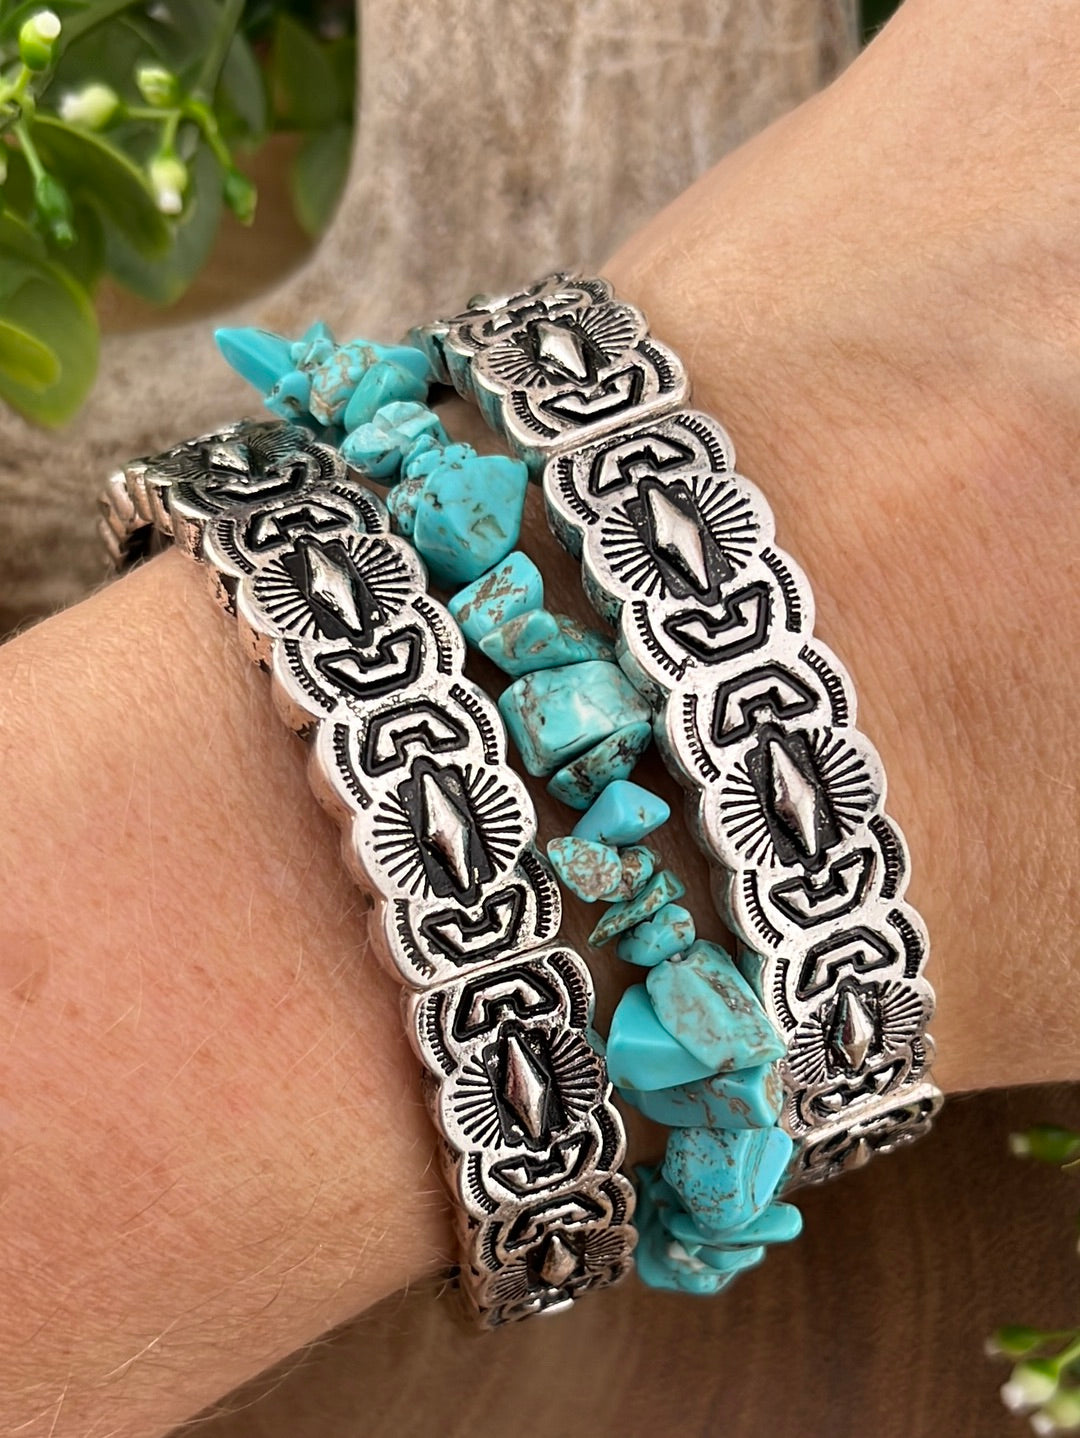 Stamped Silver & Tumbled Stone Set of 3 Stackable Stretch Bracelets - Turquoise